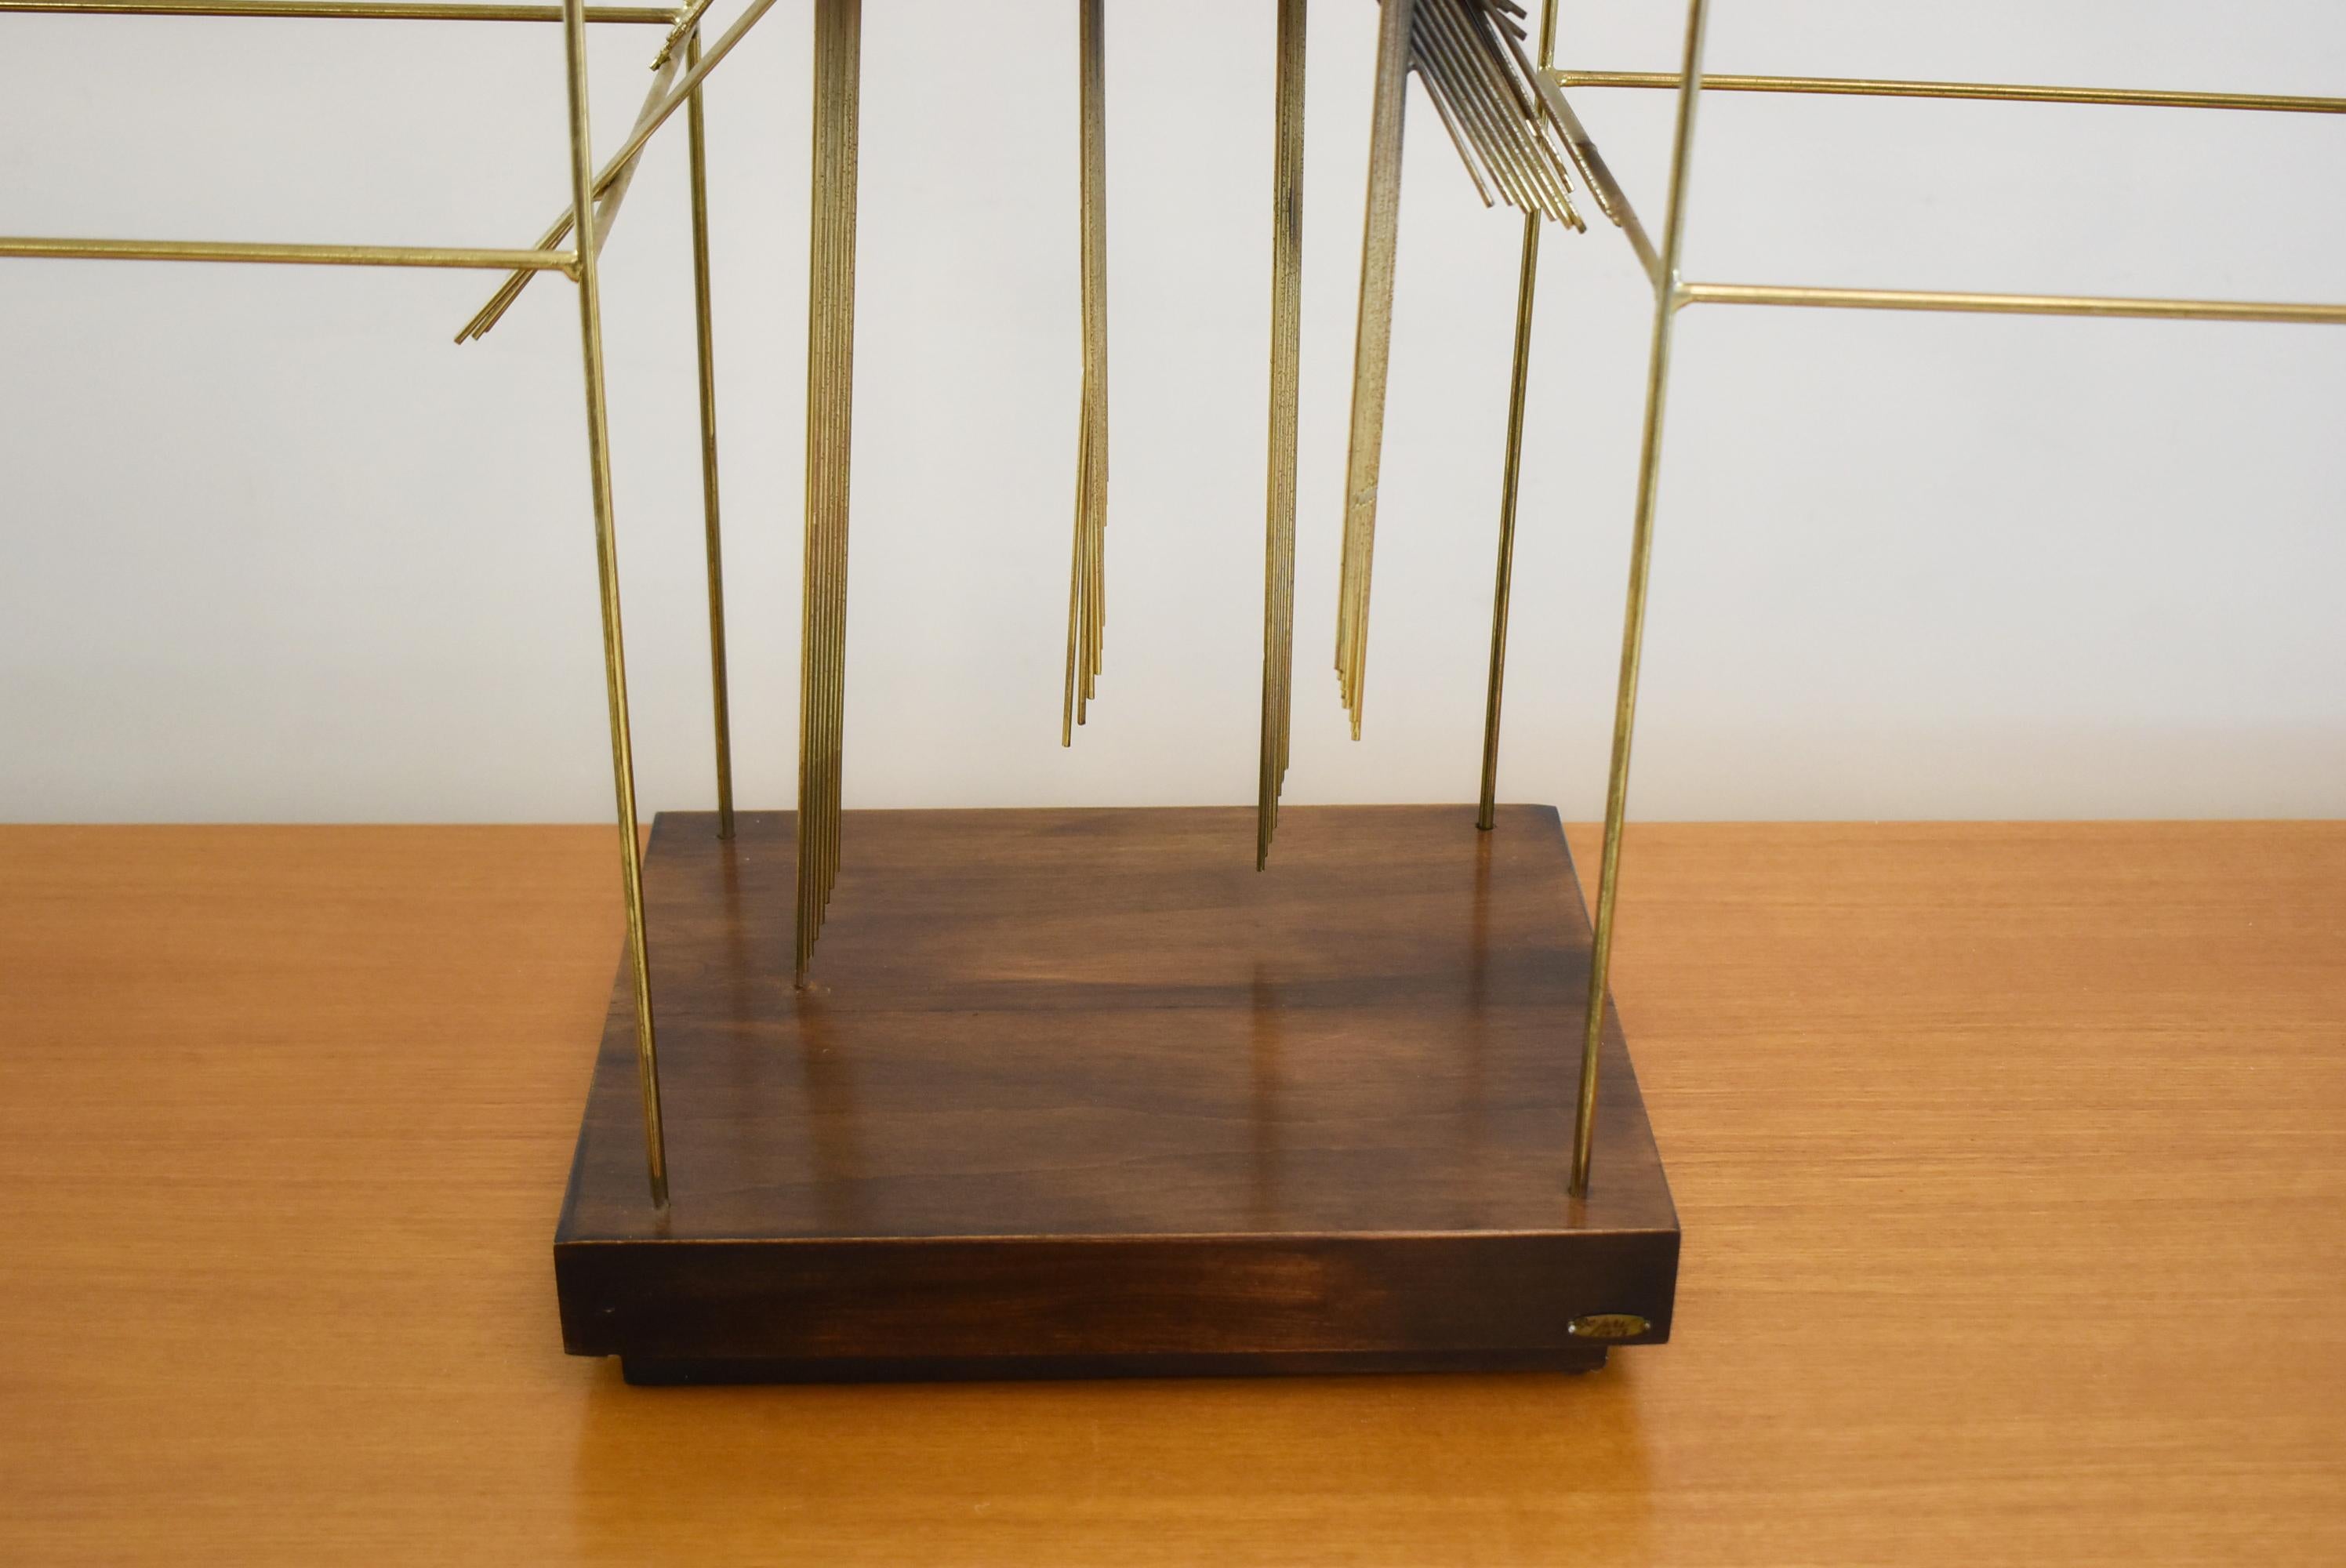 Cubist Sculpture by Curtis Jere, Intersecting Metal Rods For Sale 1